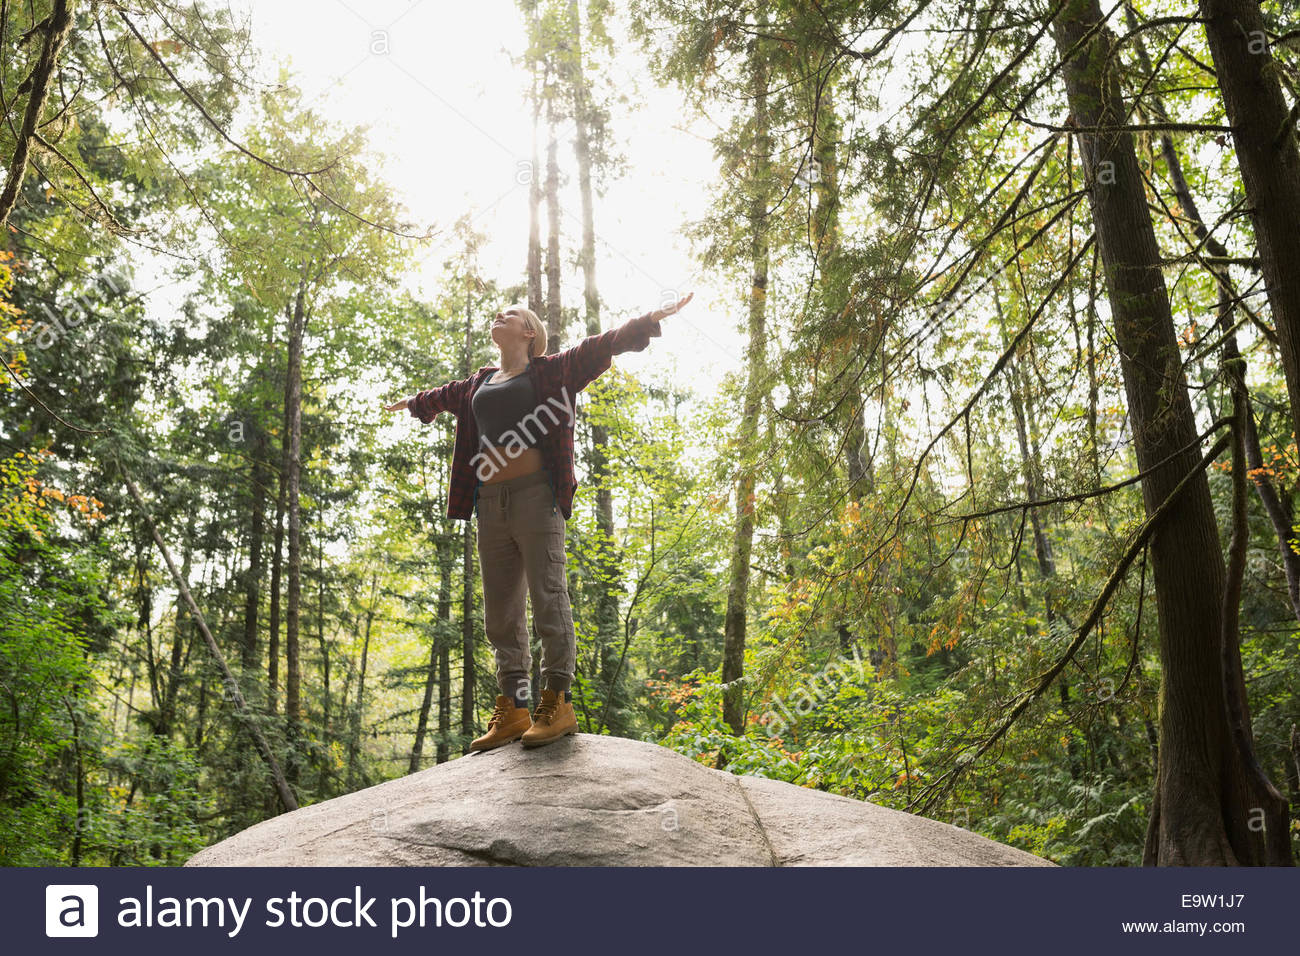 Woman with arms outstretched on rock in woods Banque D'Images